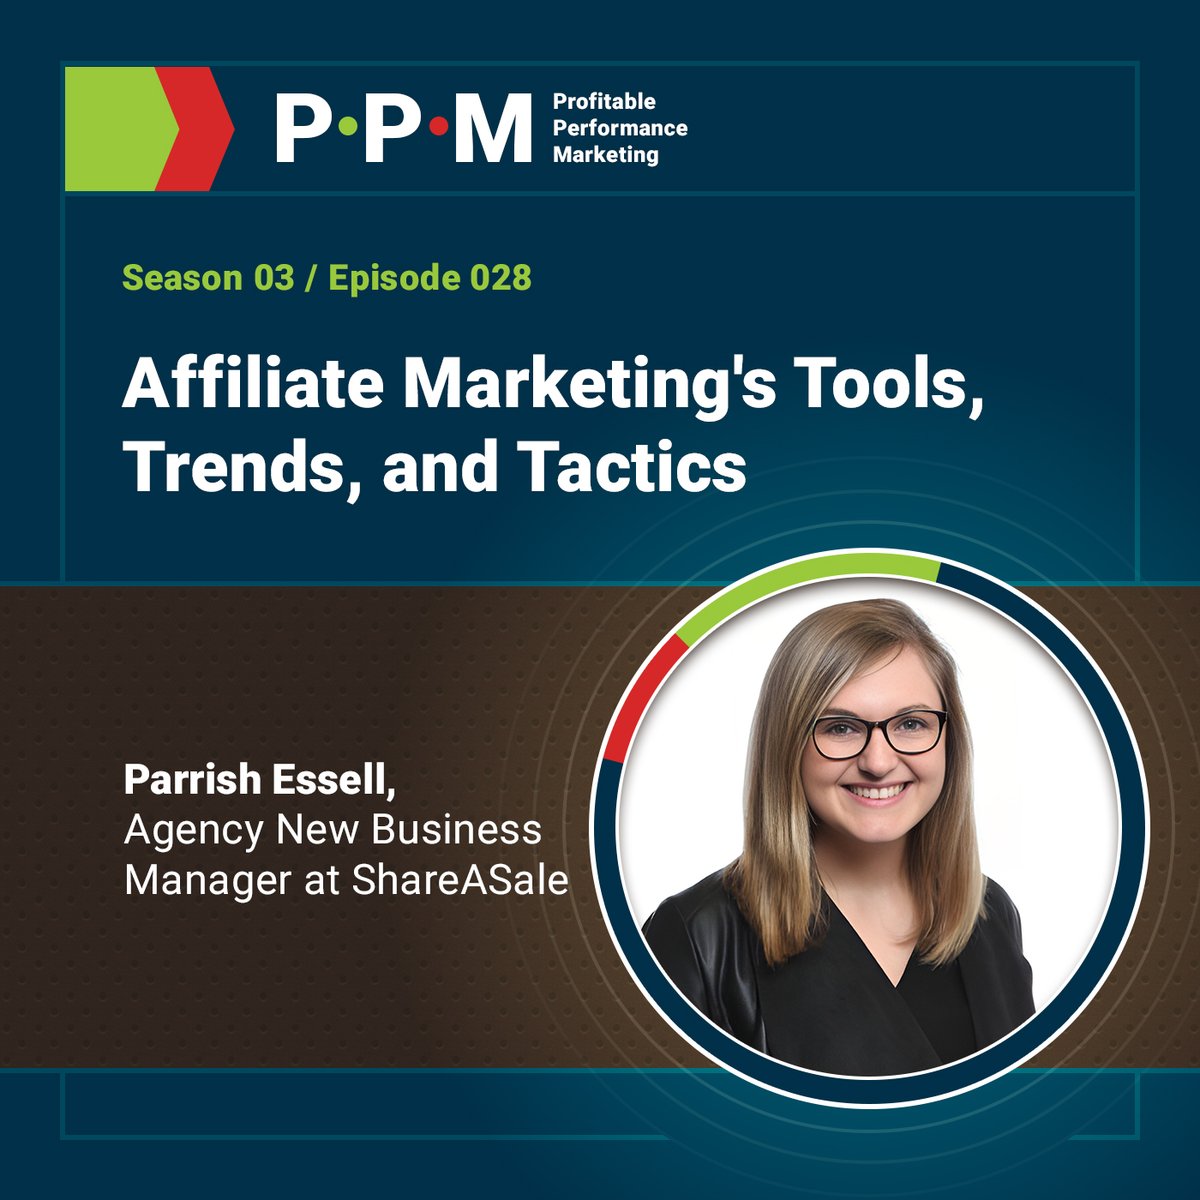 🎧 Delve into #InfluencerMarketing best practices, the crucial role of #RelationshipBuilding, and more with our Agency New Business Manager, Parrish Essell. 👉 Tune in to the latest episode of the Profitable Performance Marketing #podcast by @JEBCommerce: awin.link/JEBCommerce-Po…